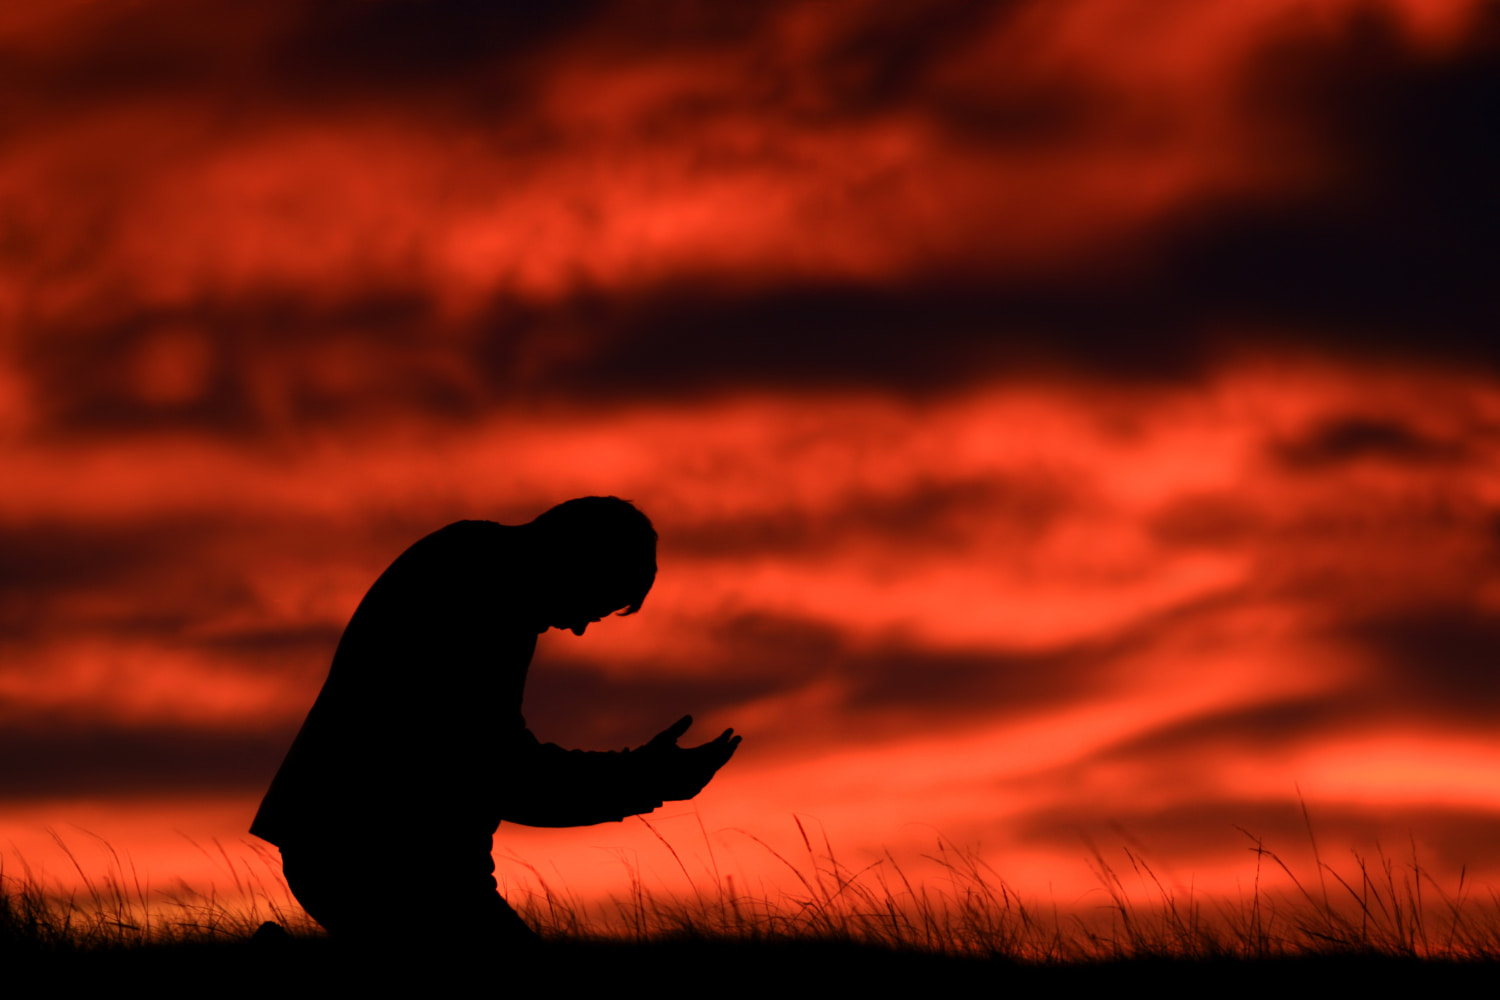 Someone on their knees praying against a red sky